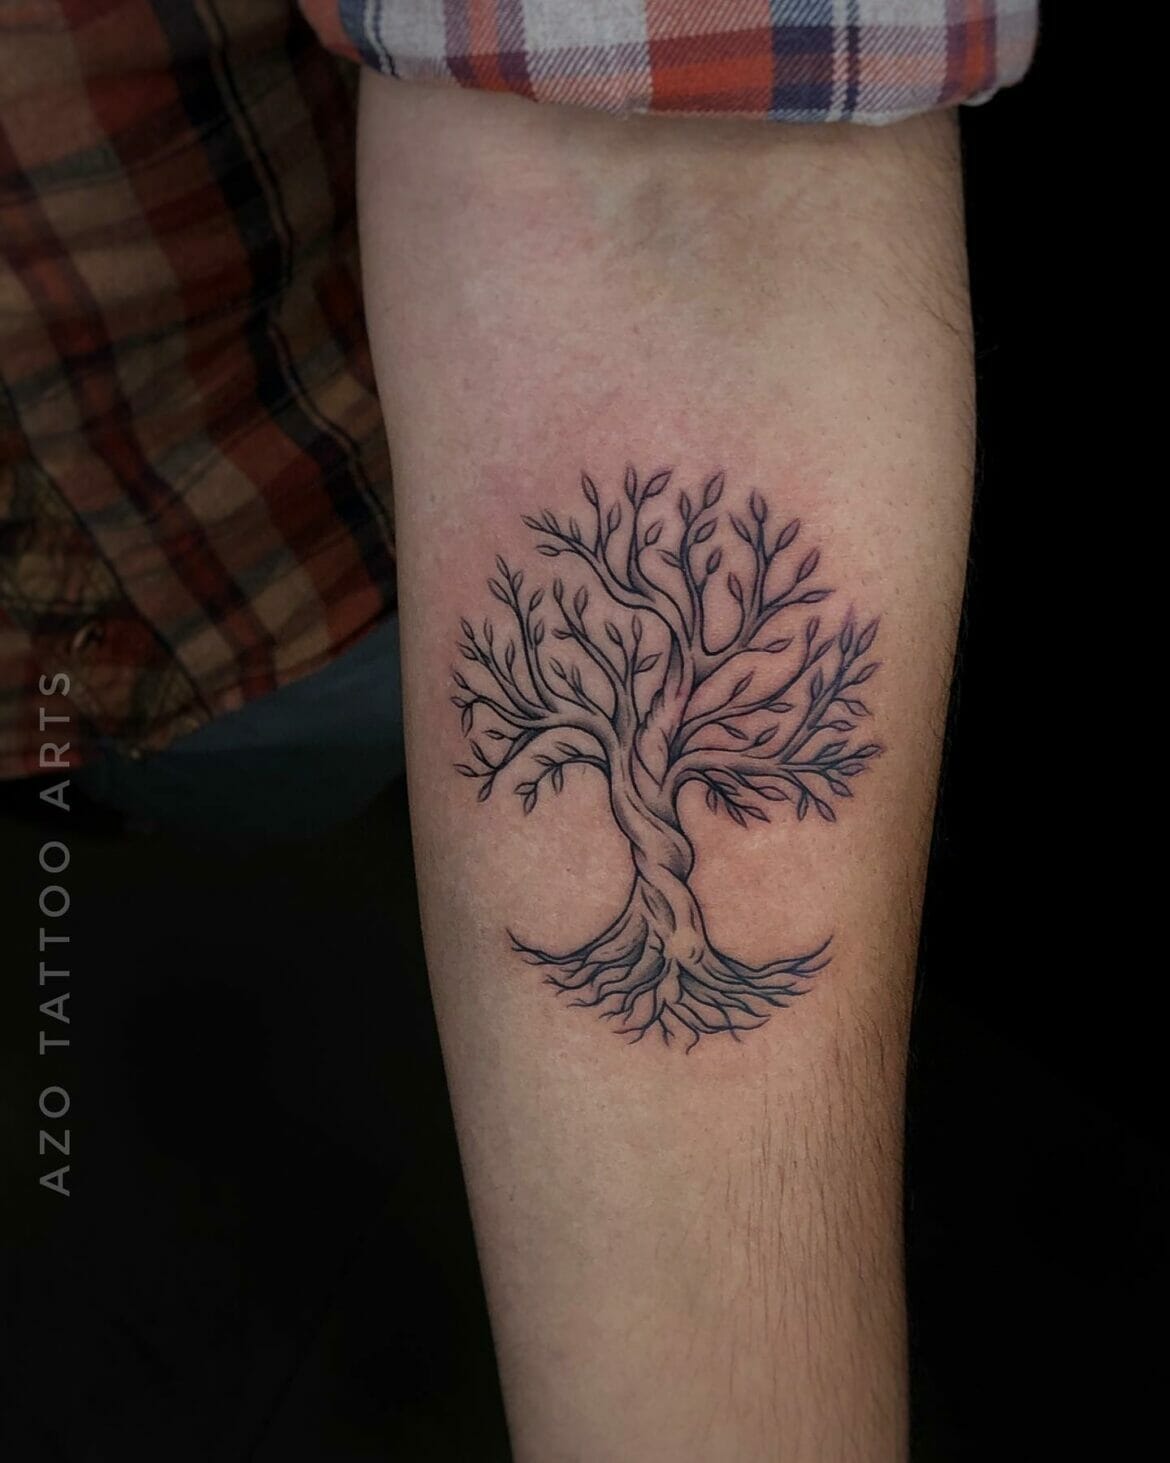 101 Best Tree Forearm Tattoo Ideas That Will Blow Your Mind!